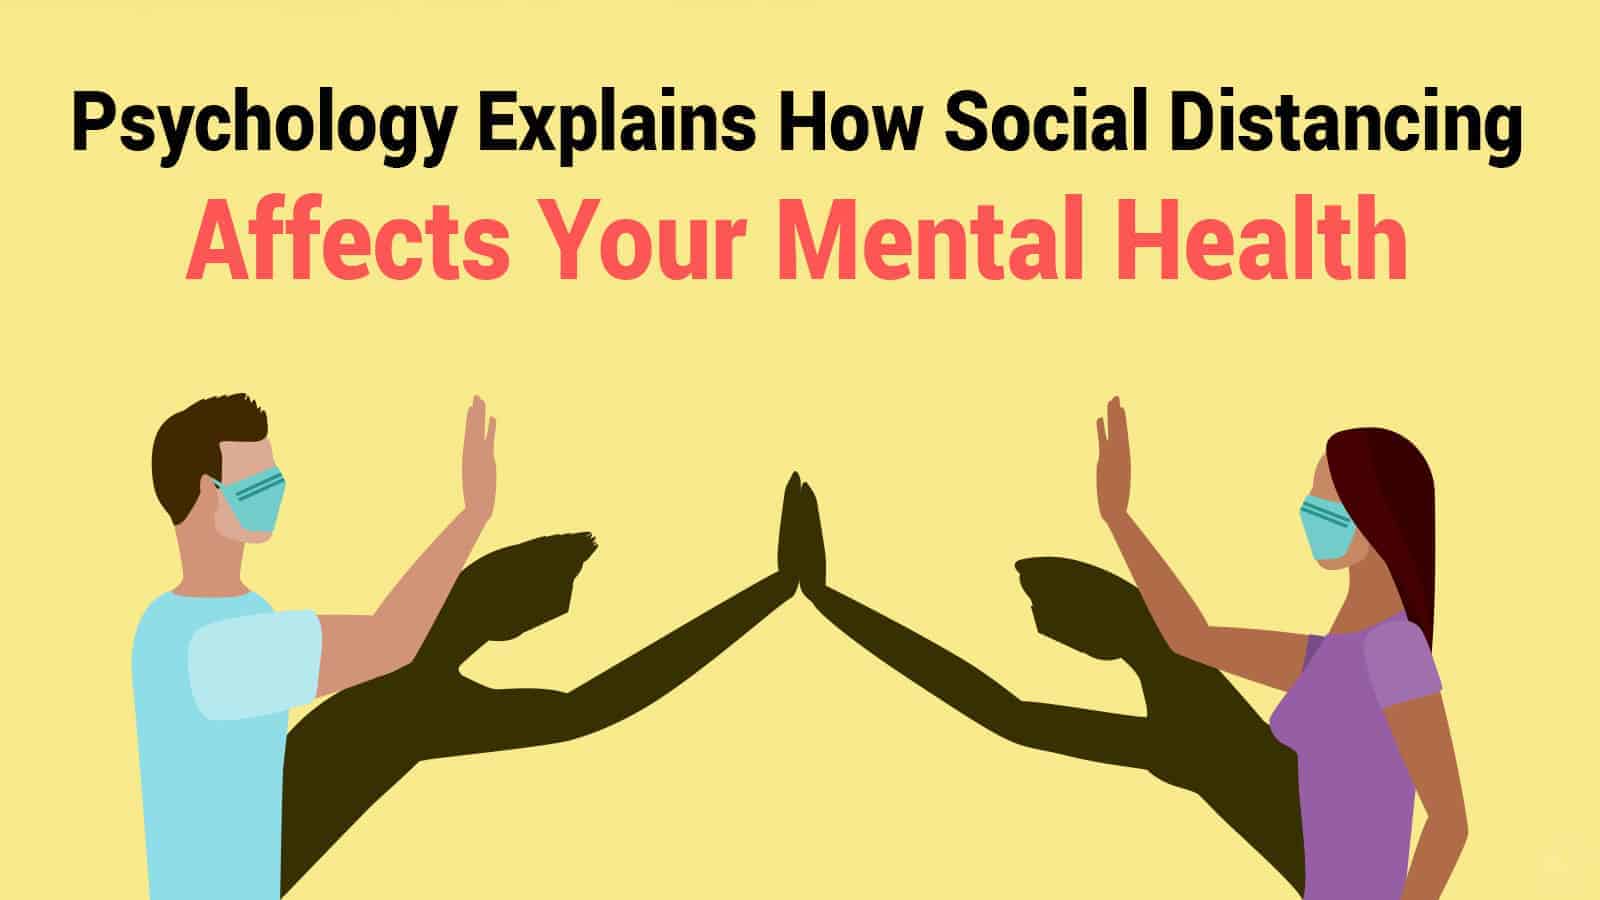 Psychology Explains How Social Distancing Affects Your Mental Health